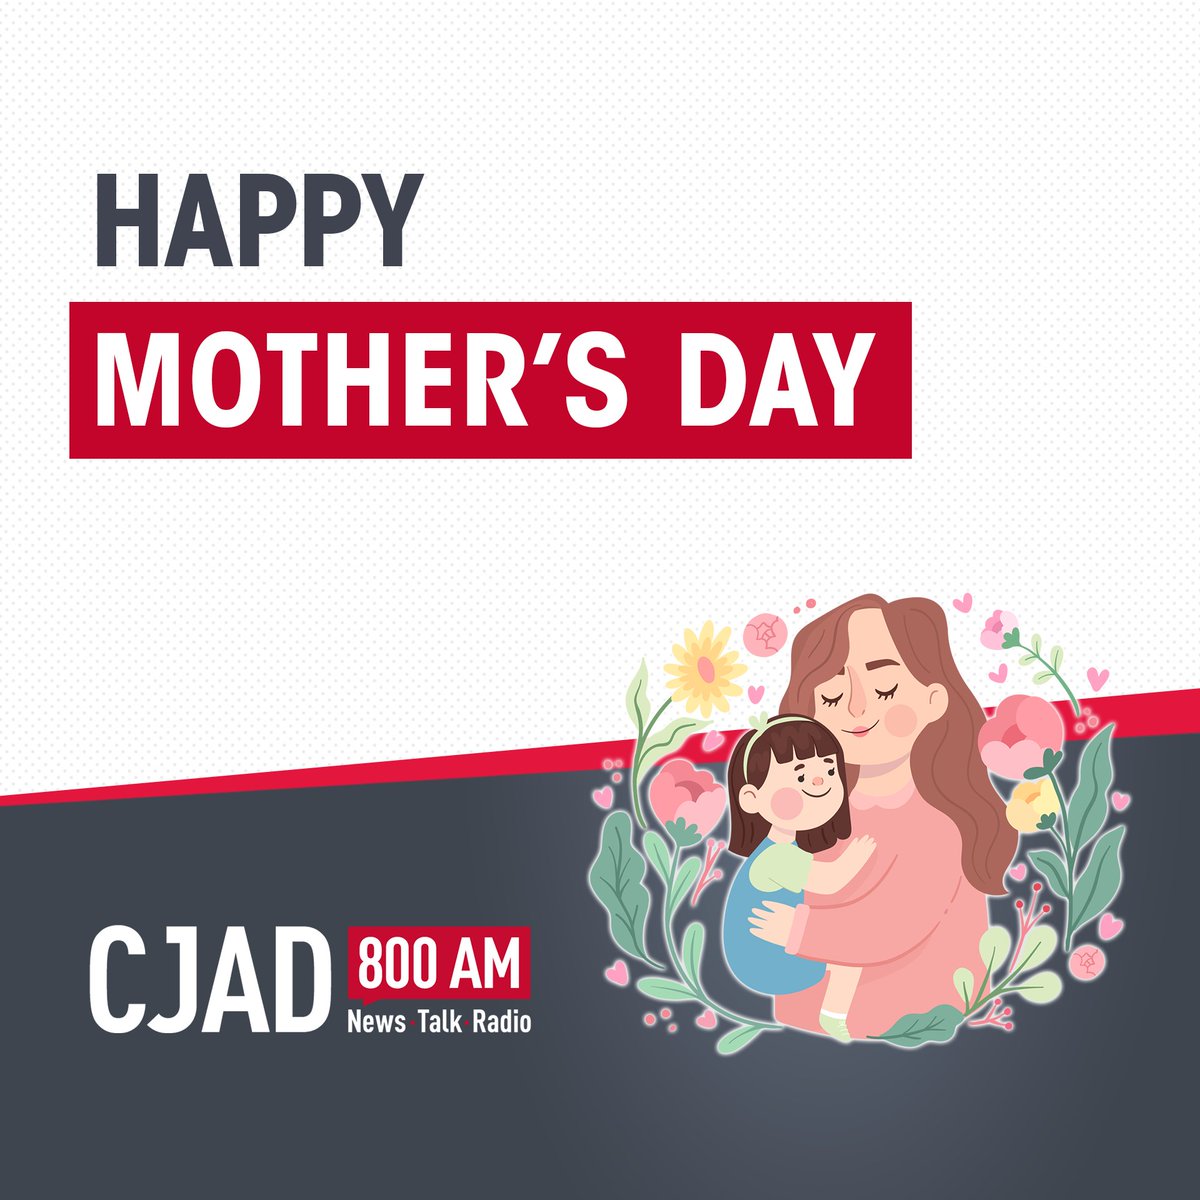 Happy Mother's Day from CJAD 800!